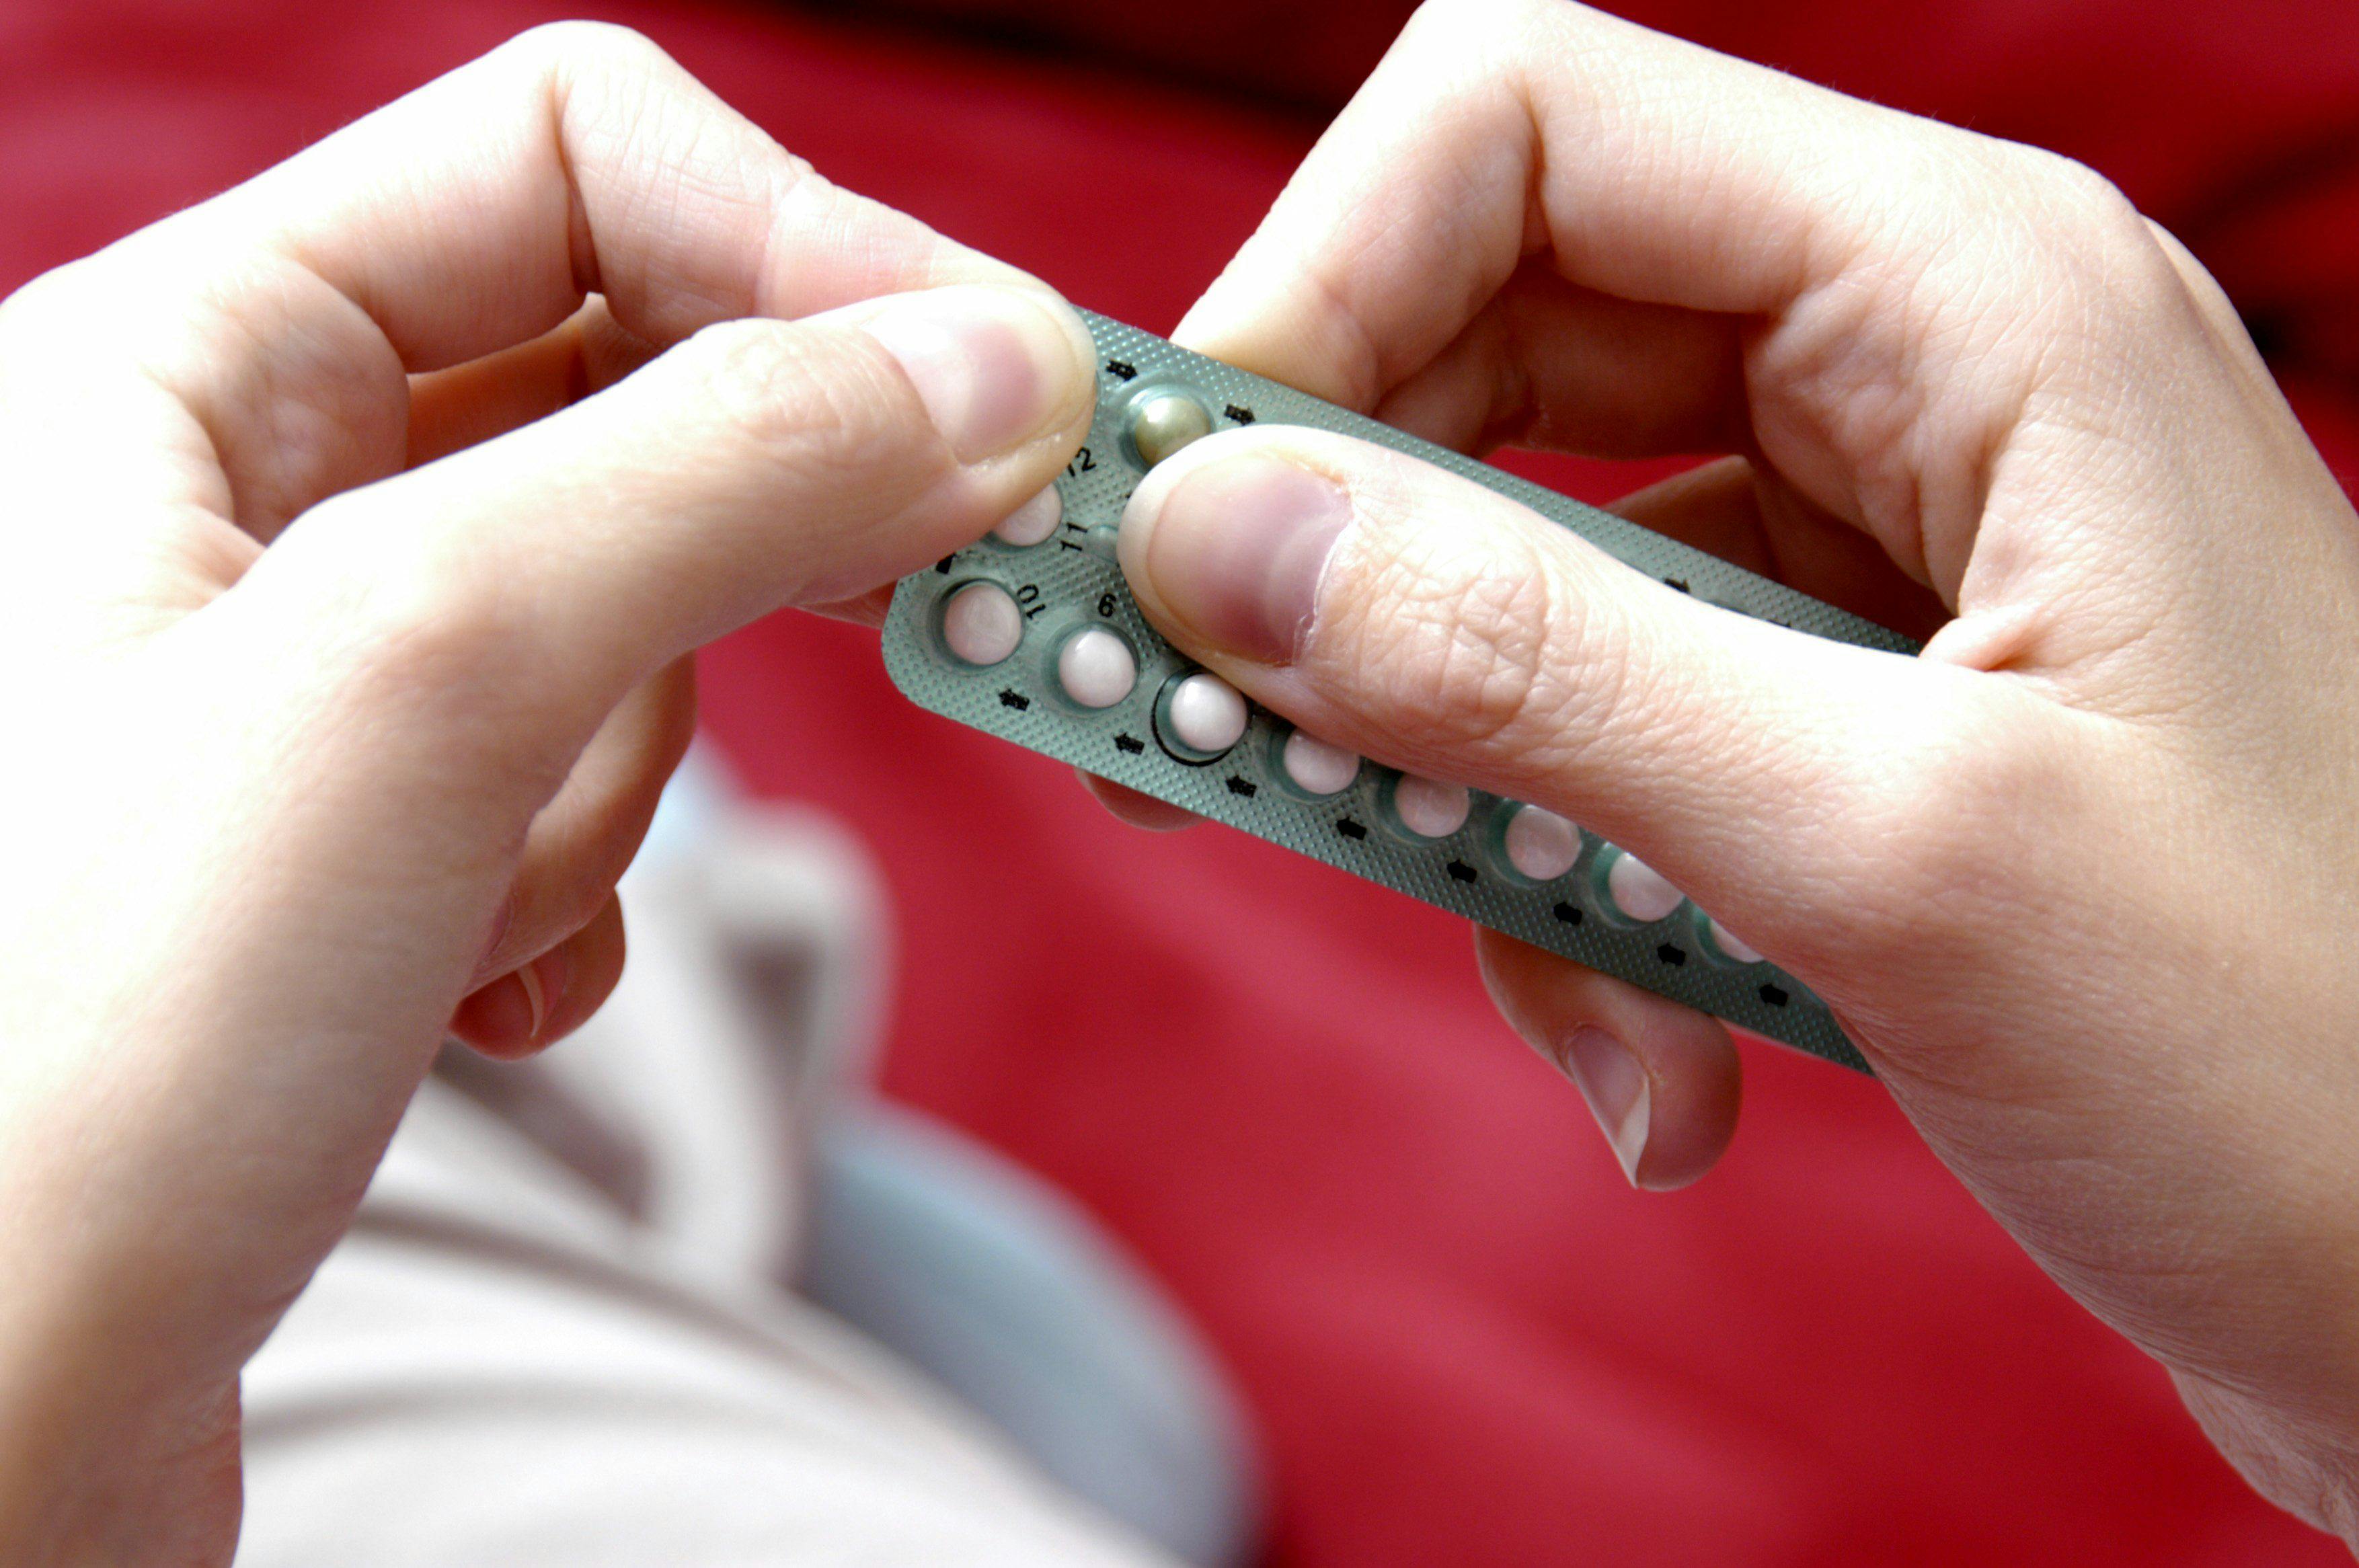 Adolescents with autism less likely to visit ob/gyn, receive contraceptives